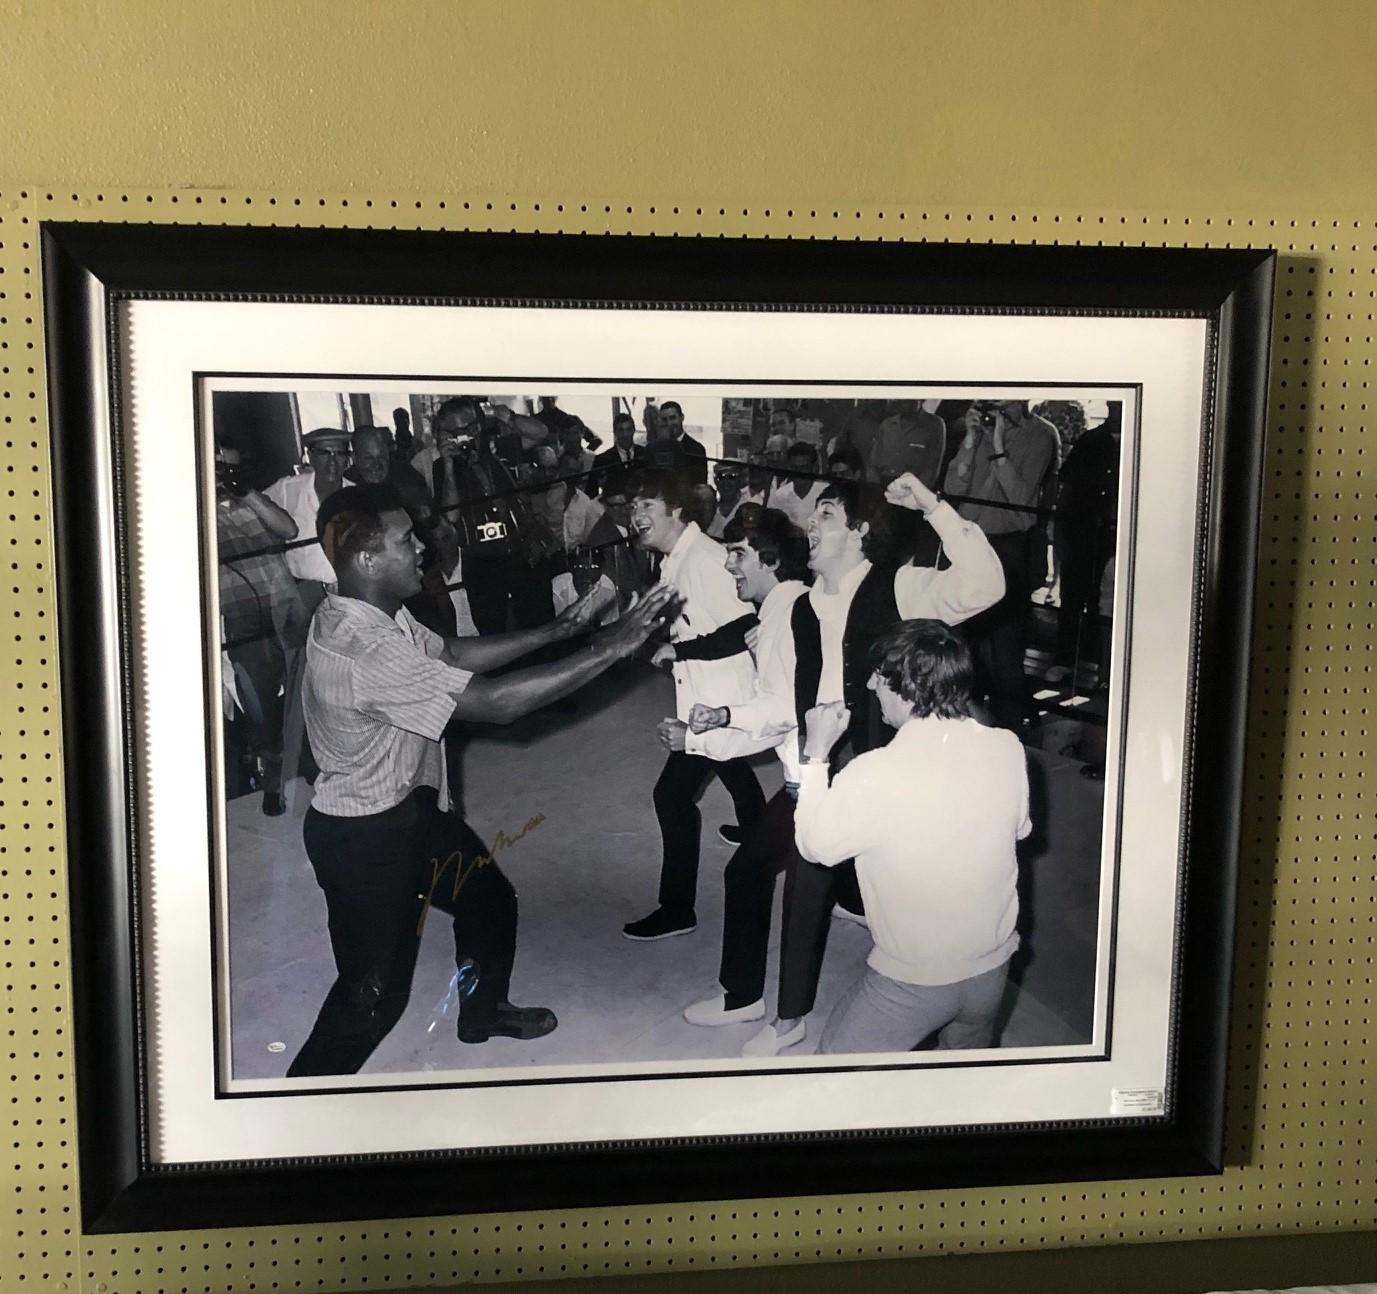 Black and white photograph of Muhammad Ali (Cassius Clay) and the Beatles taken in February, 1964 in Miami Beach, Florida. The photo is signed in gold ink by Ali and is professionally matted and framed.

The photograph measures 30